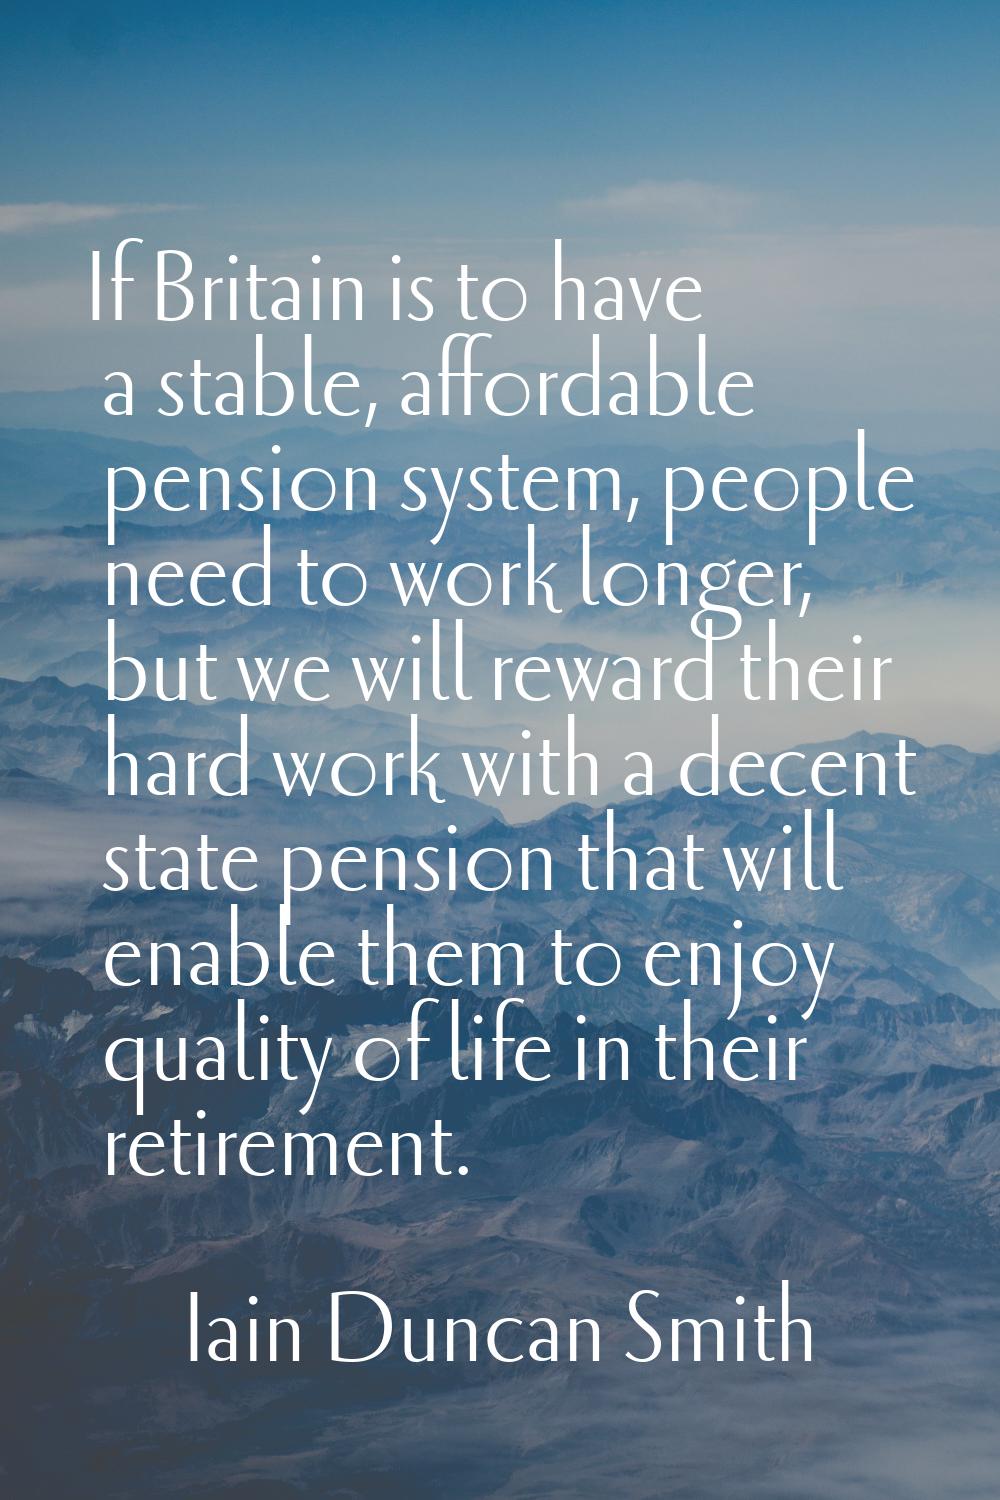 If Britain is to have a stable, affordable pension system, people need to work longer, but we will 